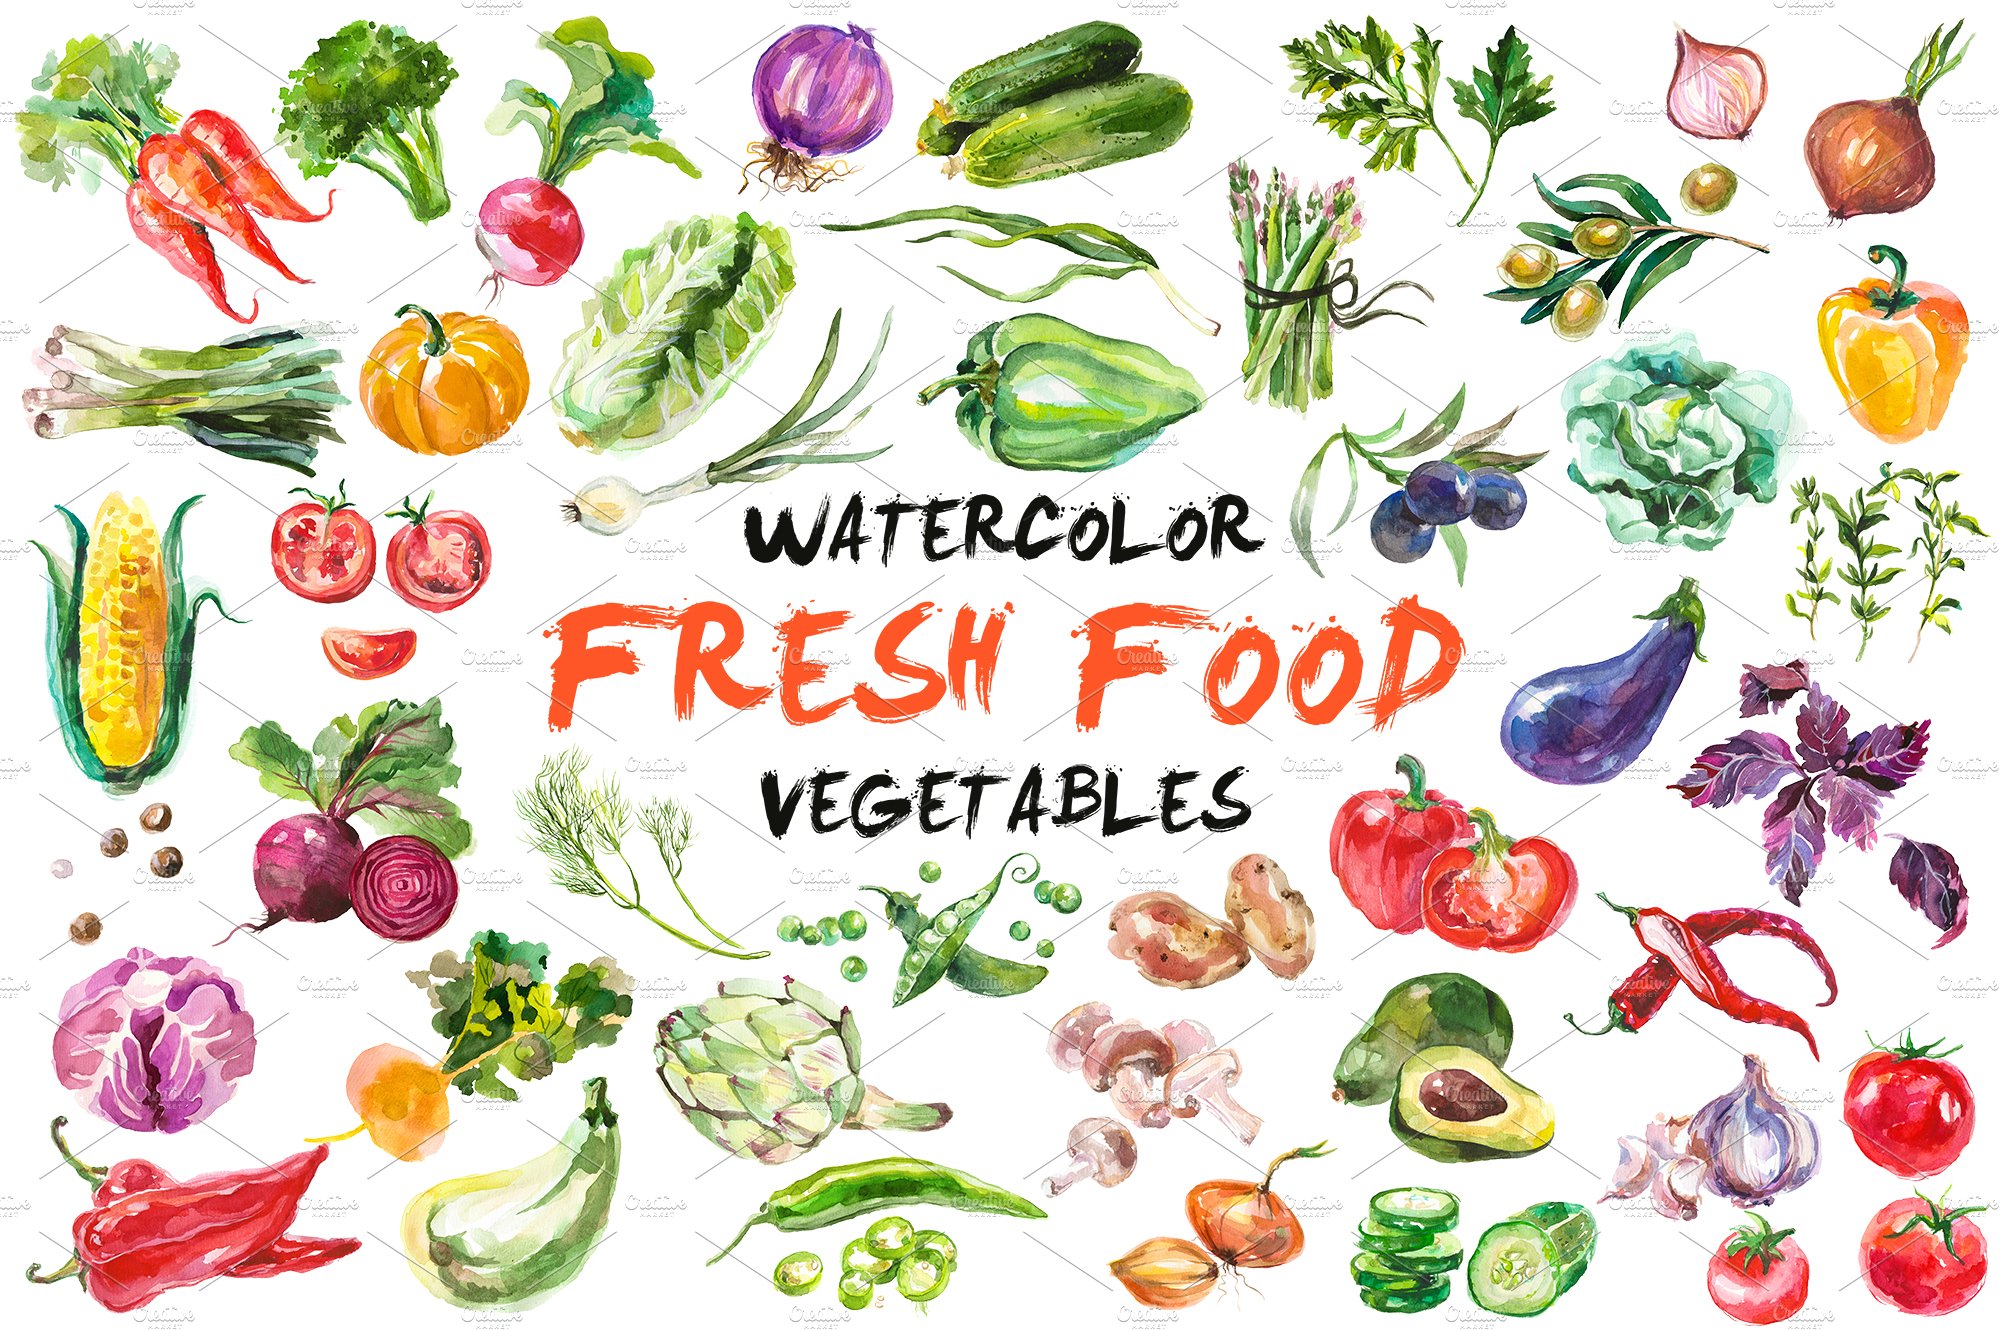 Watercolor Vegetables cover image.